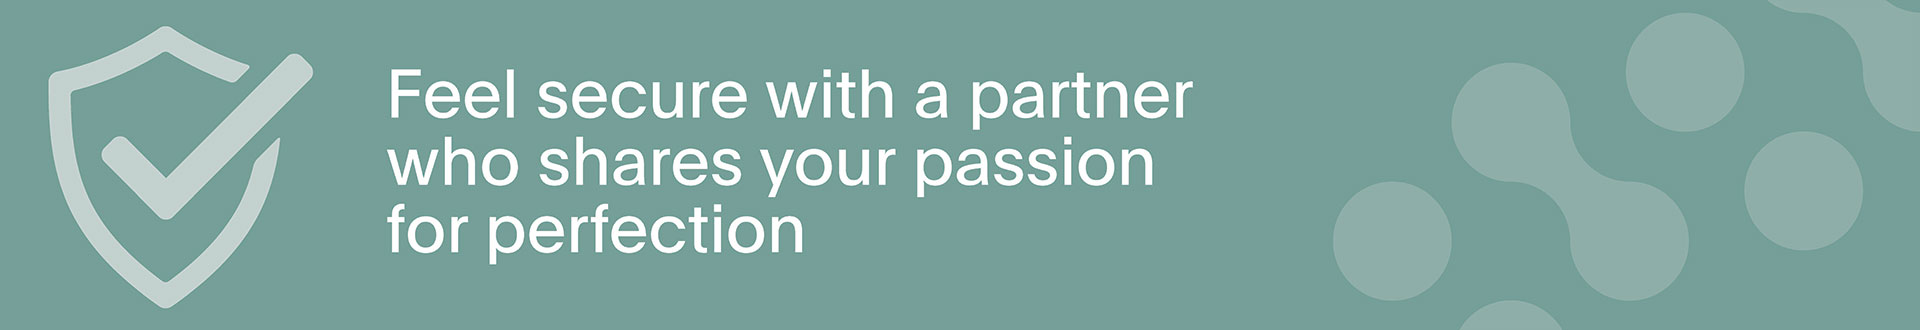 Feel secure with a partner who shares your passion for perfection